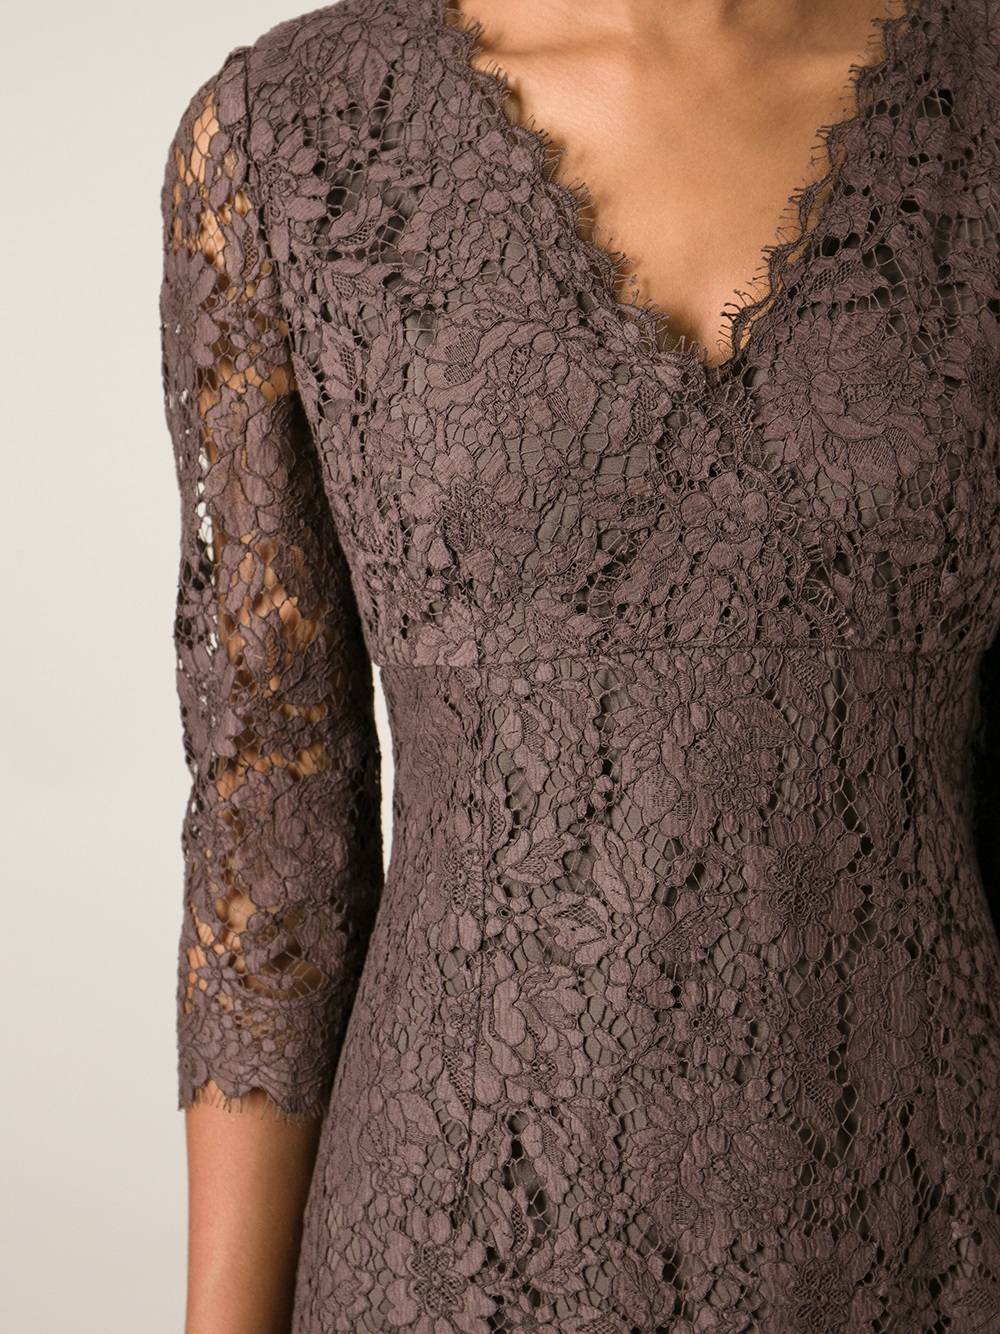 Dolce & Gabbana Lace Dress in Brown - Lyst